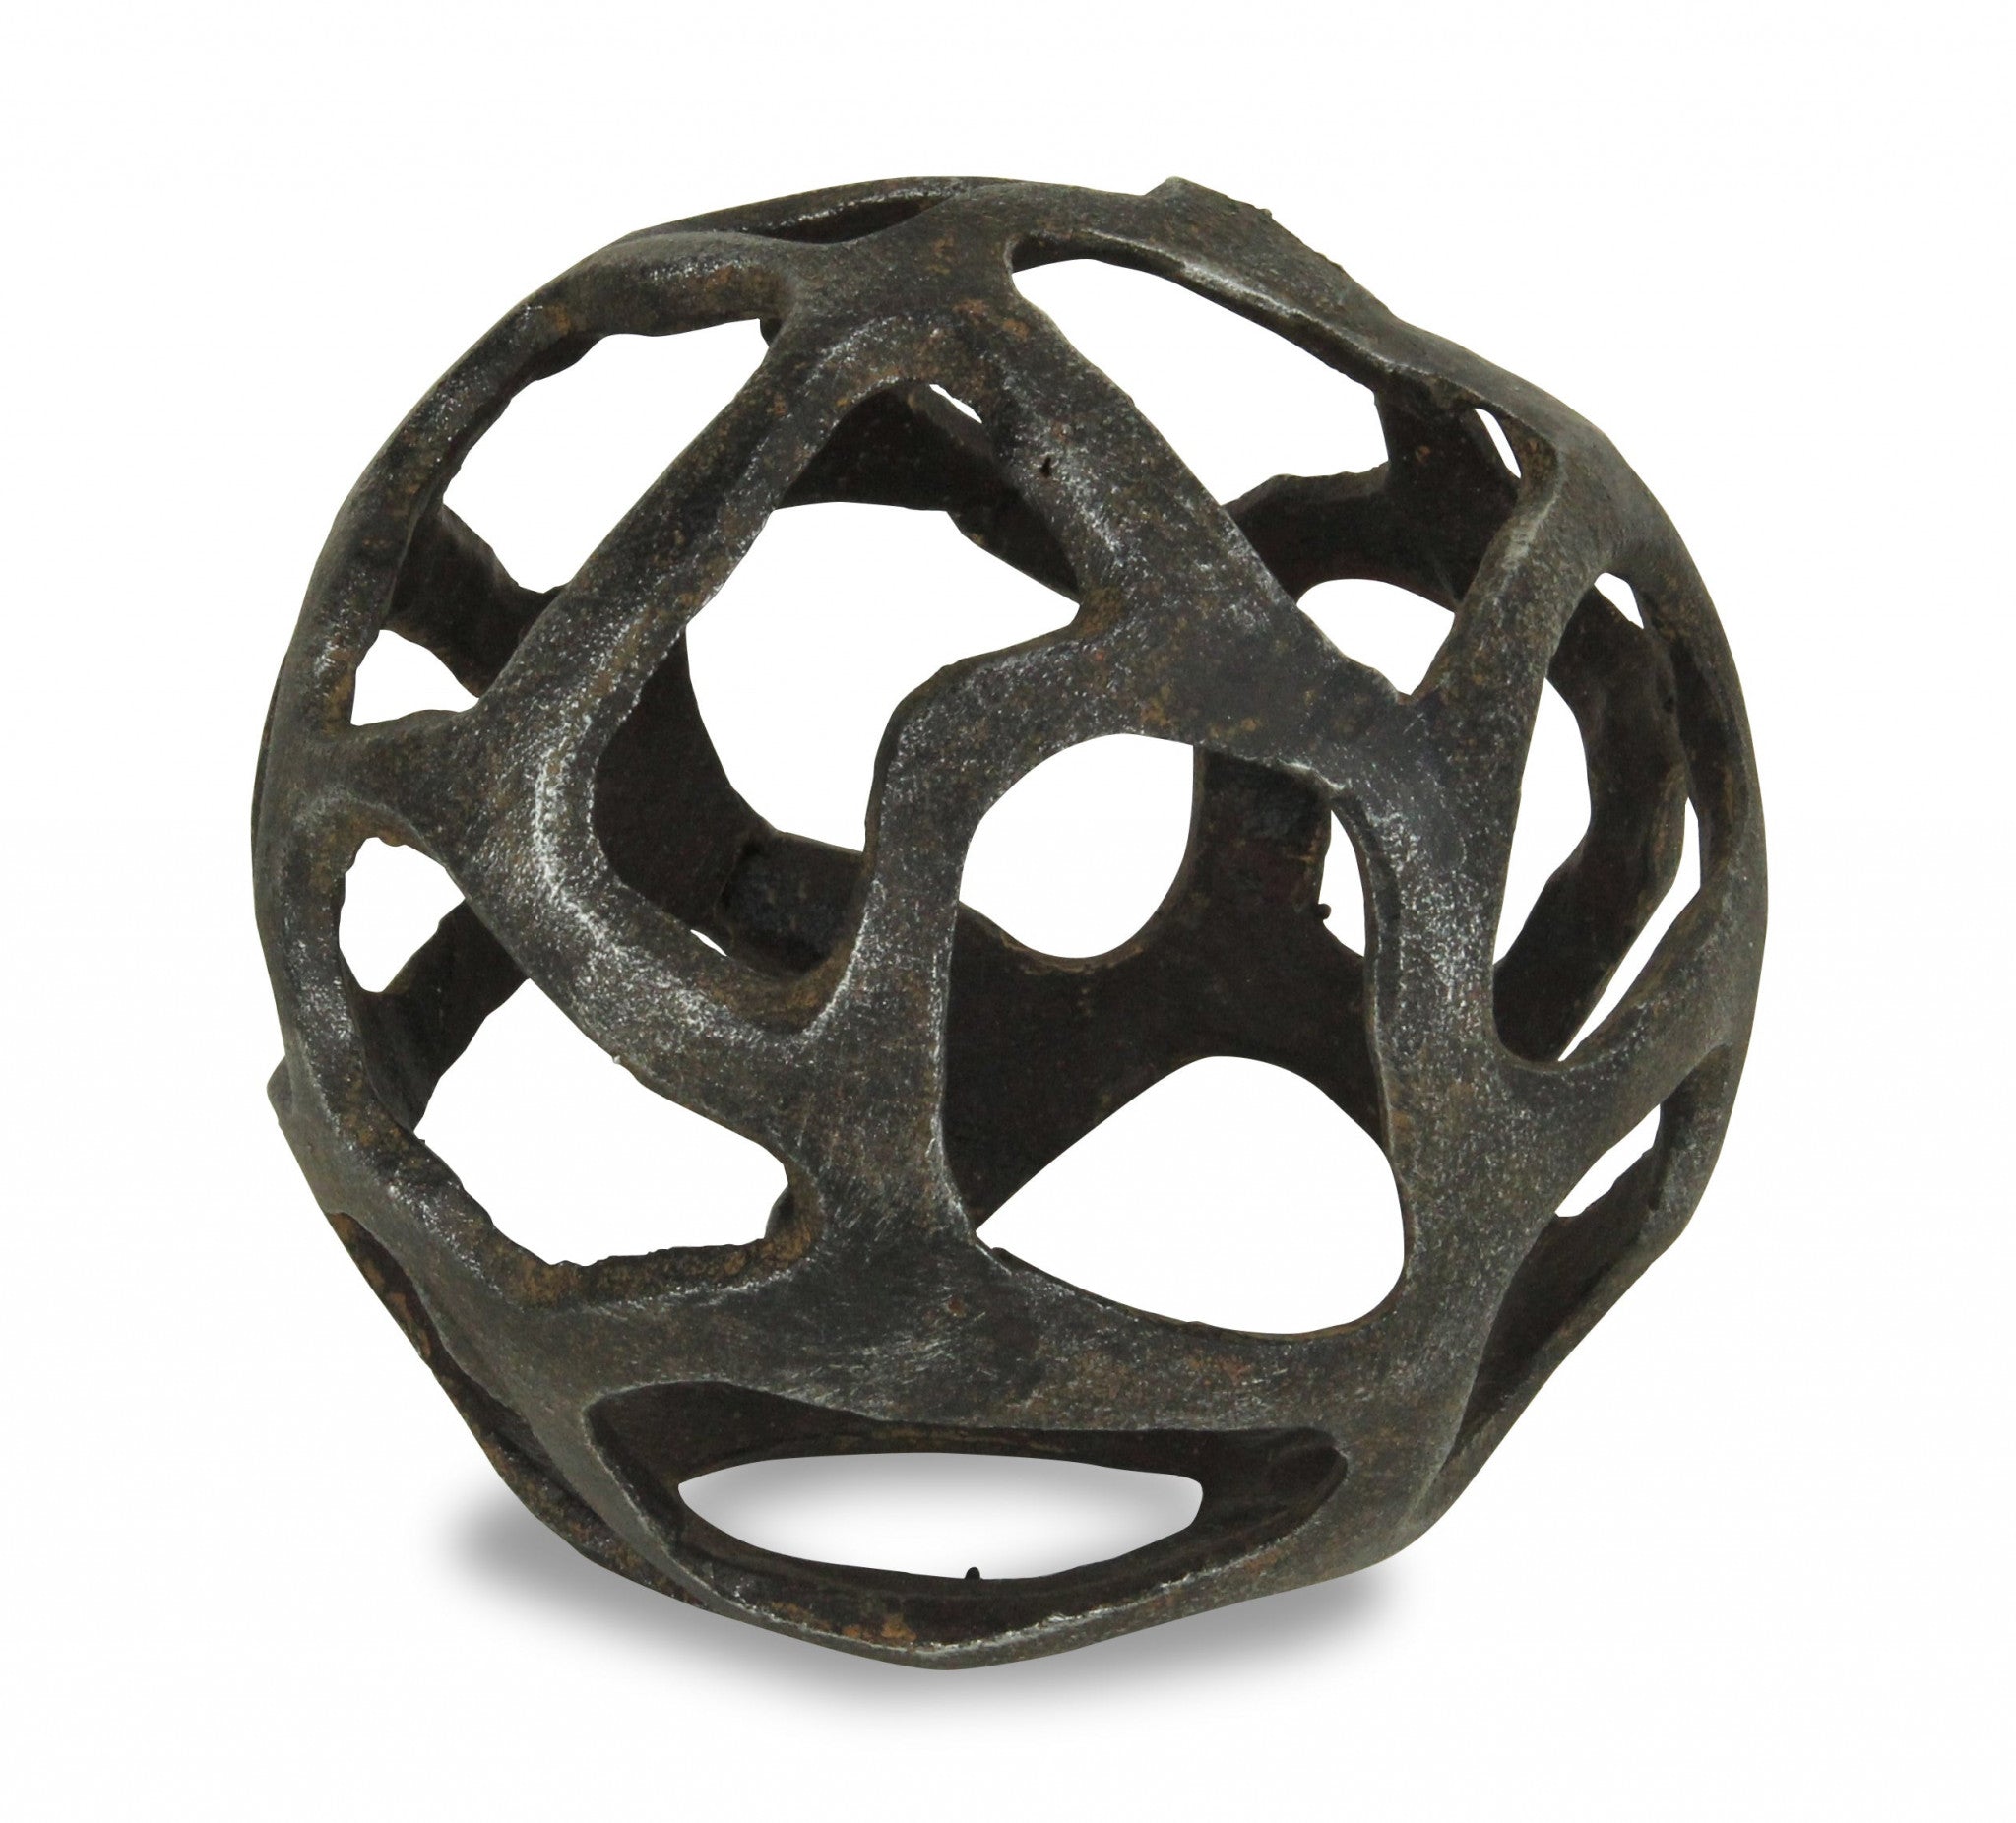 6" Natural Black Cast Iron Abstract Decorative Orb